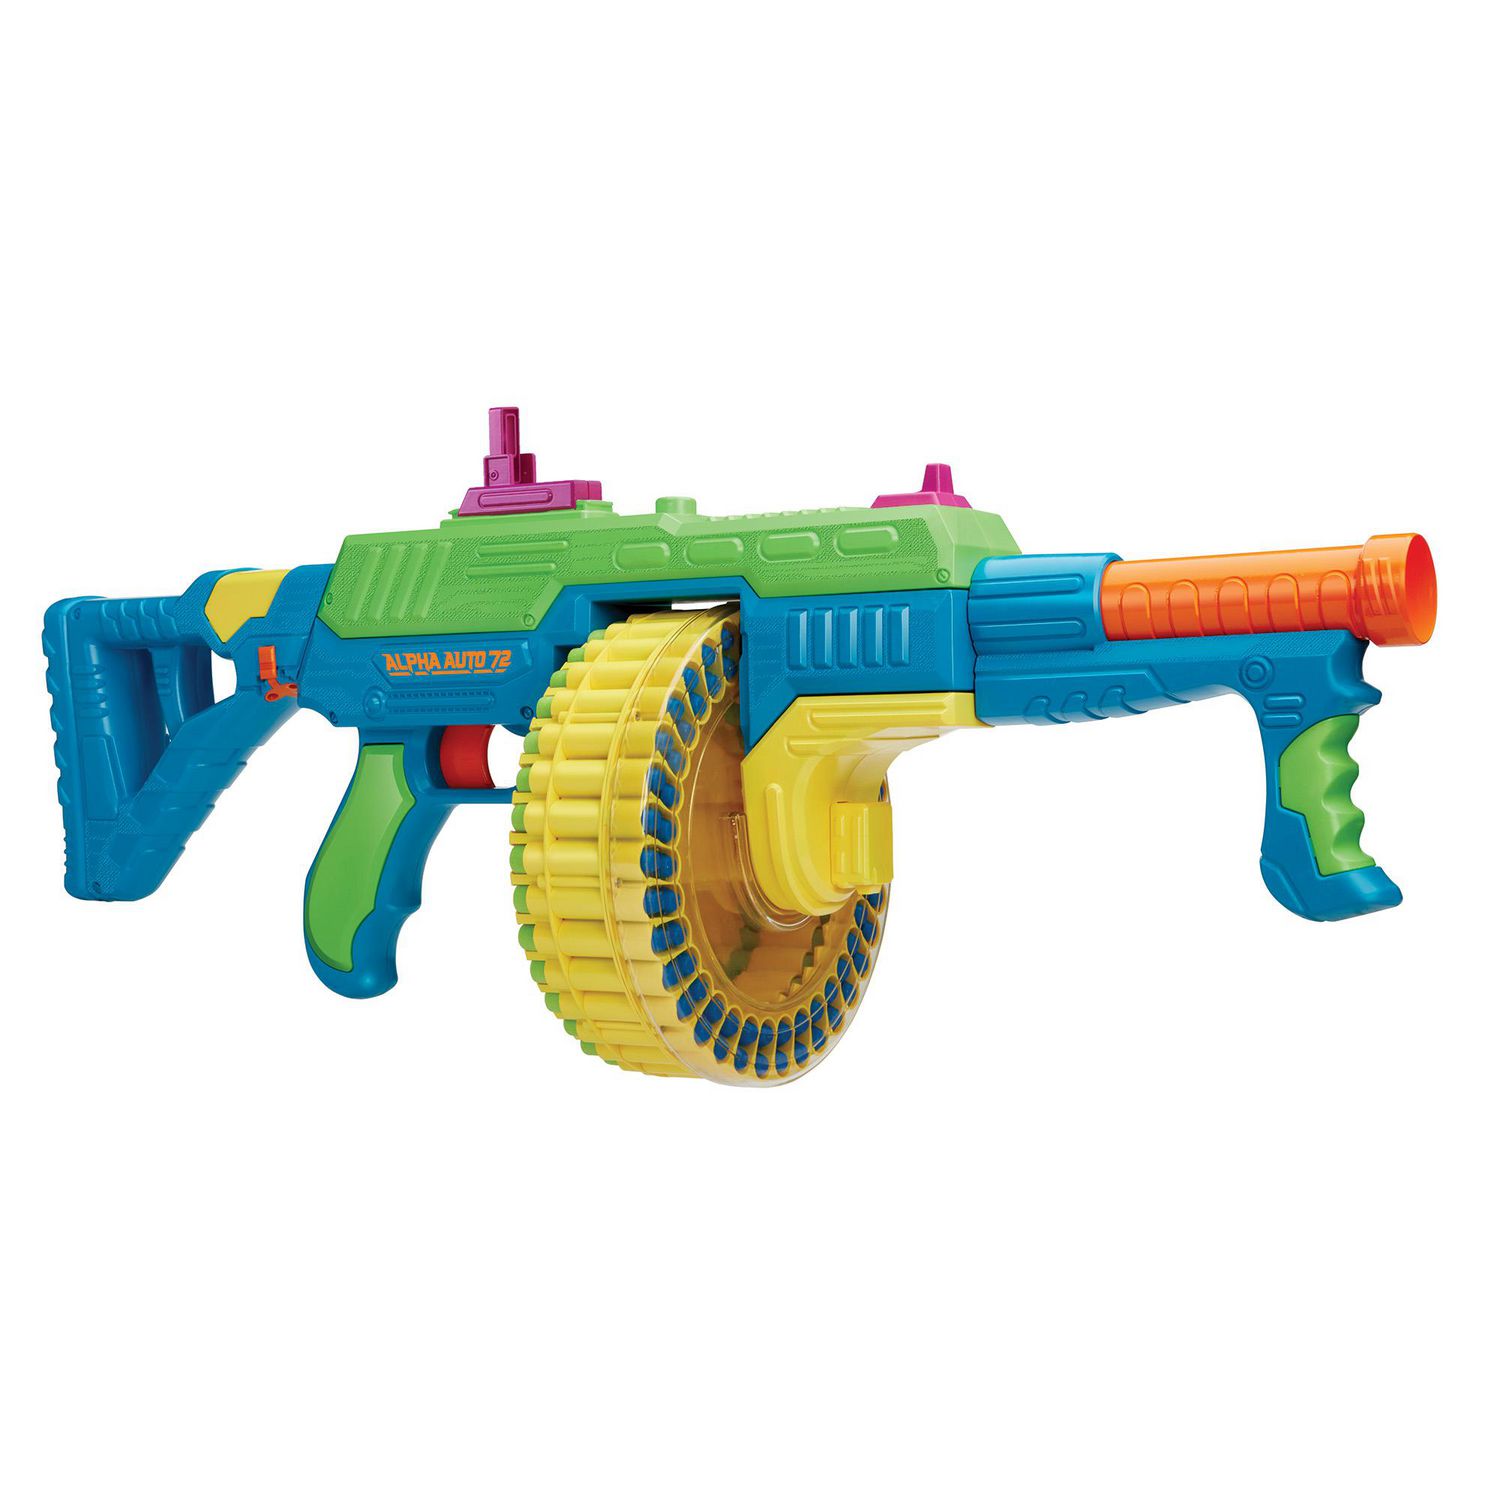 NERF Ultra Select Fully Motorized Blaster, Fire for Distance or Accuracy,  Includes Clips and Darts, Outdoor Games and Toys, Automatic Electric Full